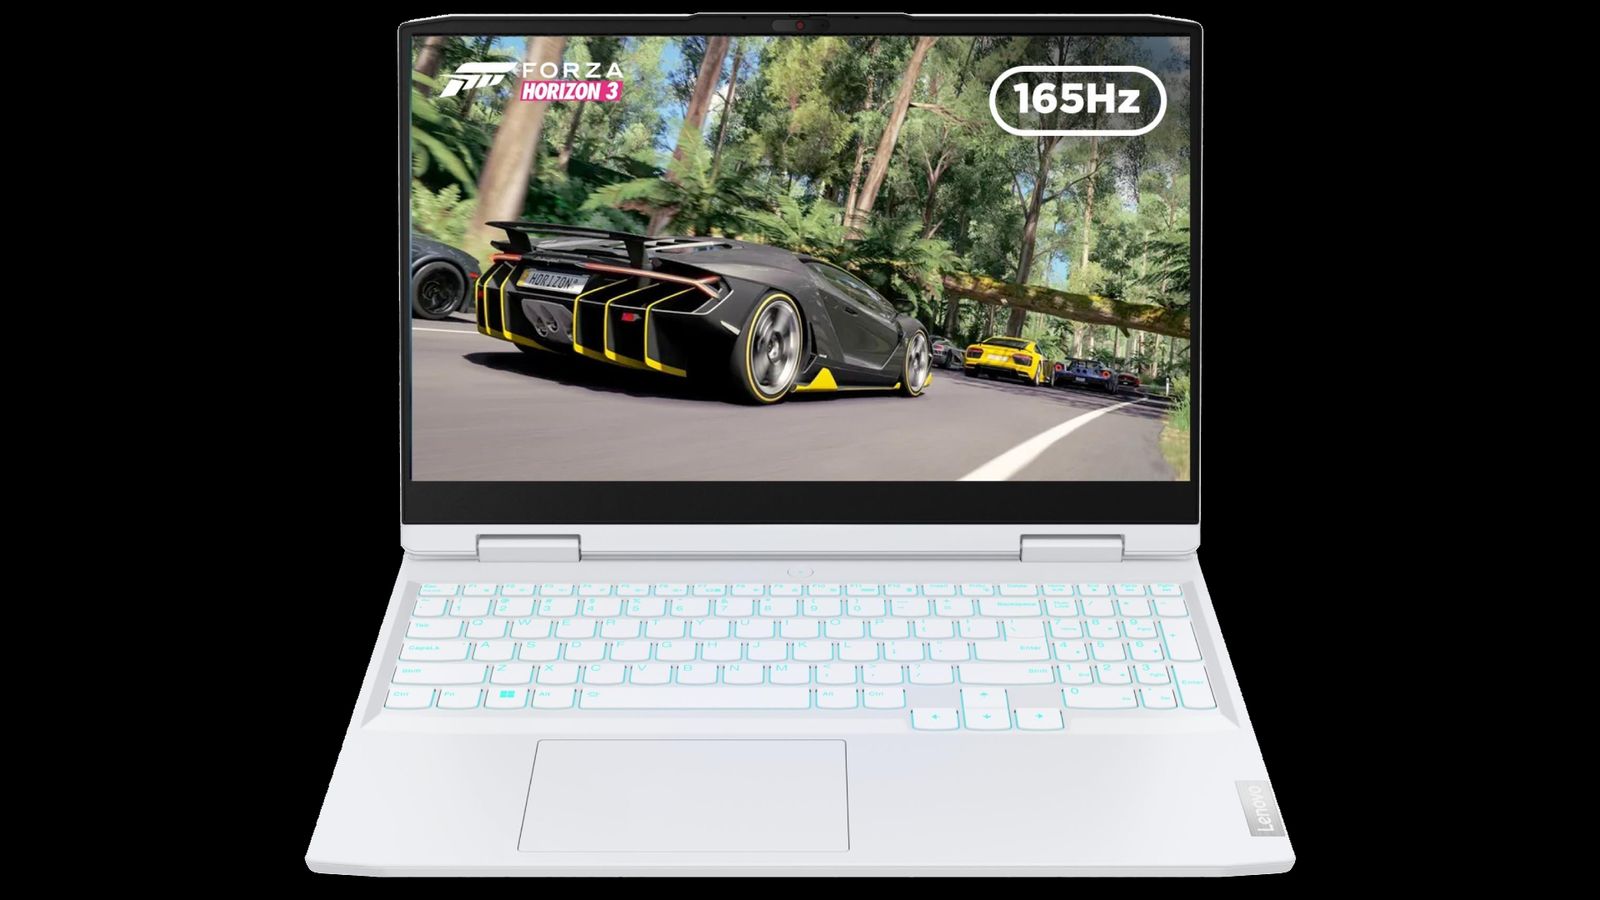 Lenovo IdeaPad Gaming 3 product image of a white laptop with Forza Horizon 5 gameplay on the dispplay.